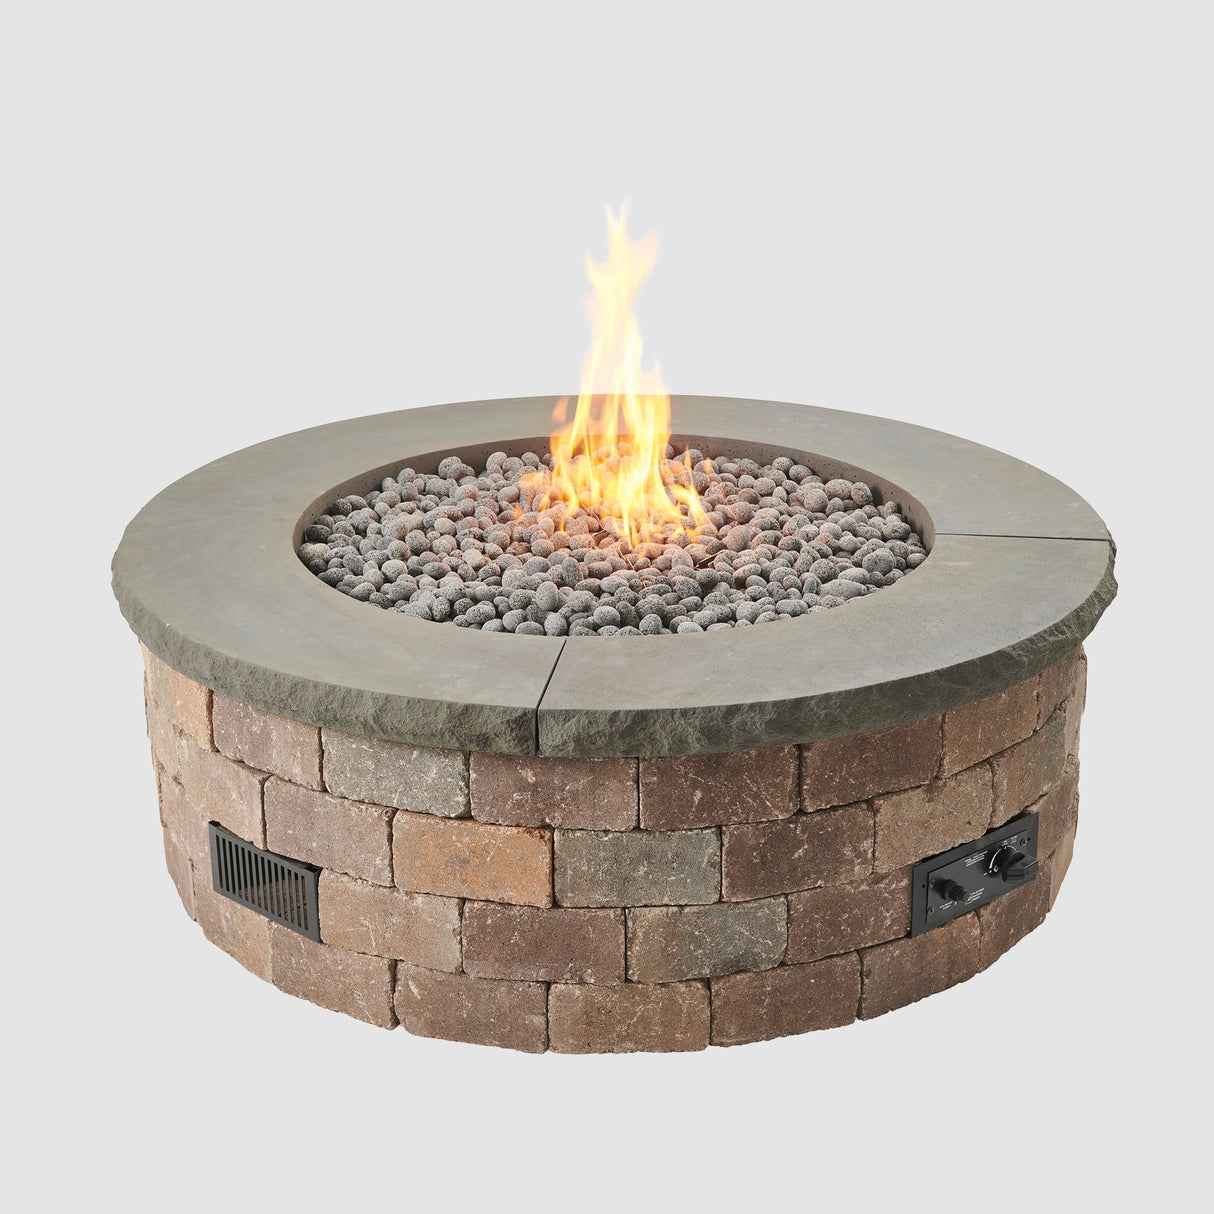 Charcoal Grey Concrete Top for Round Bronson Block Gas Fire Pit Kit with flame on grey background